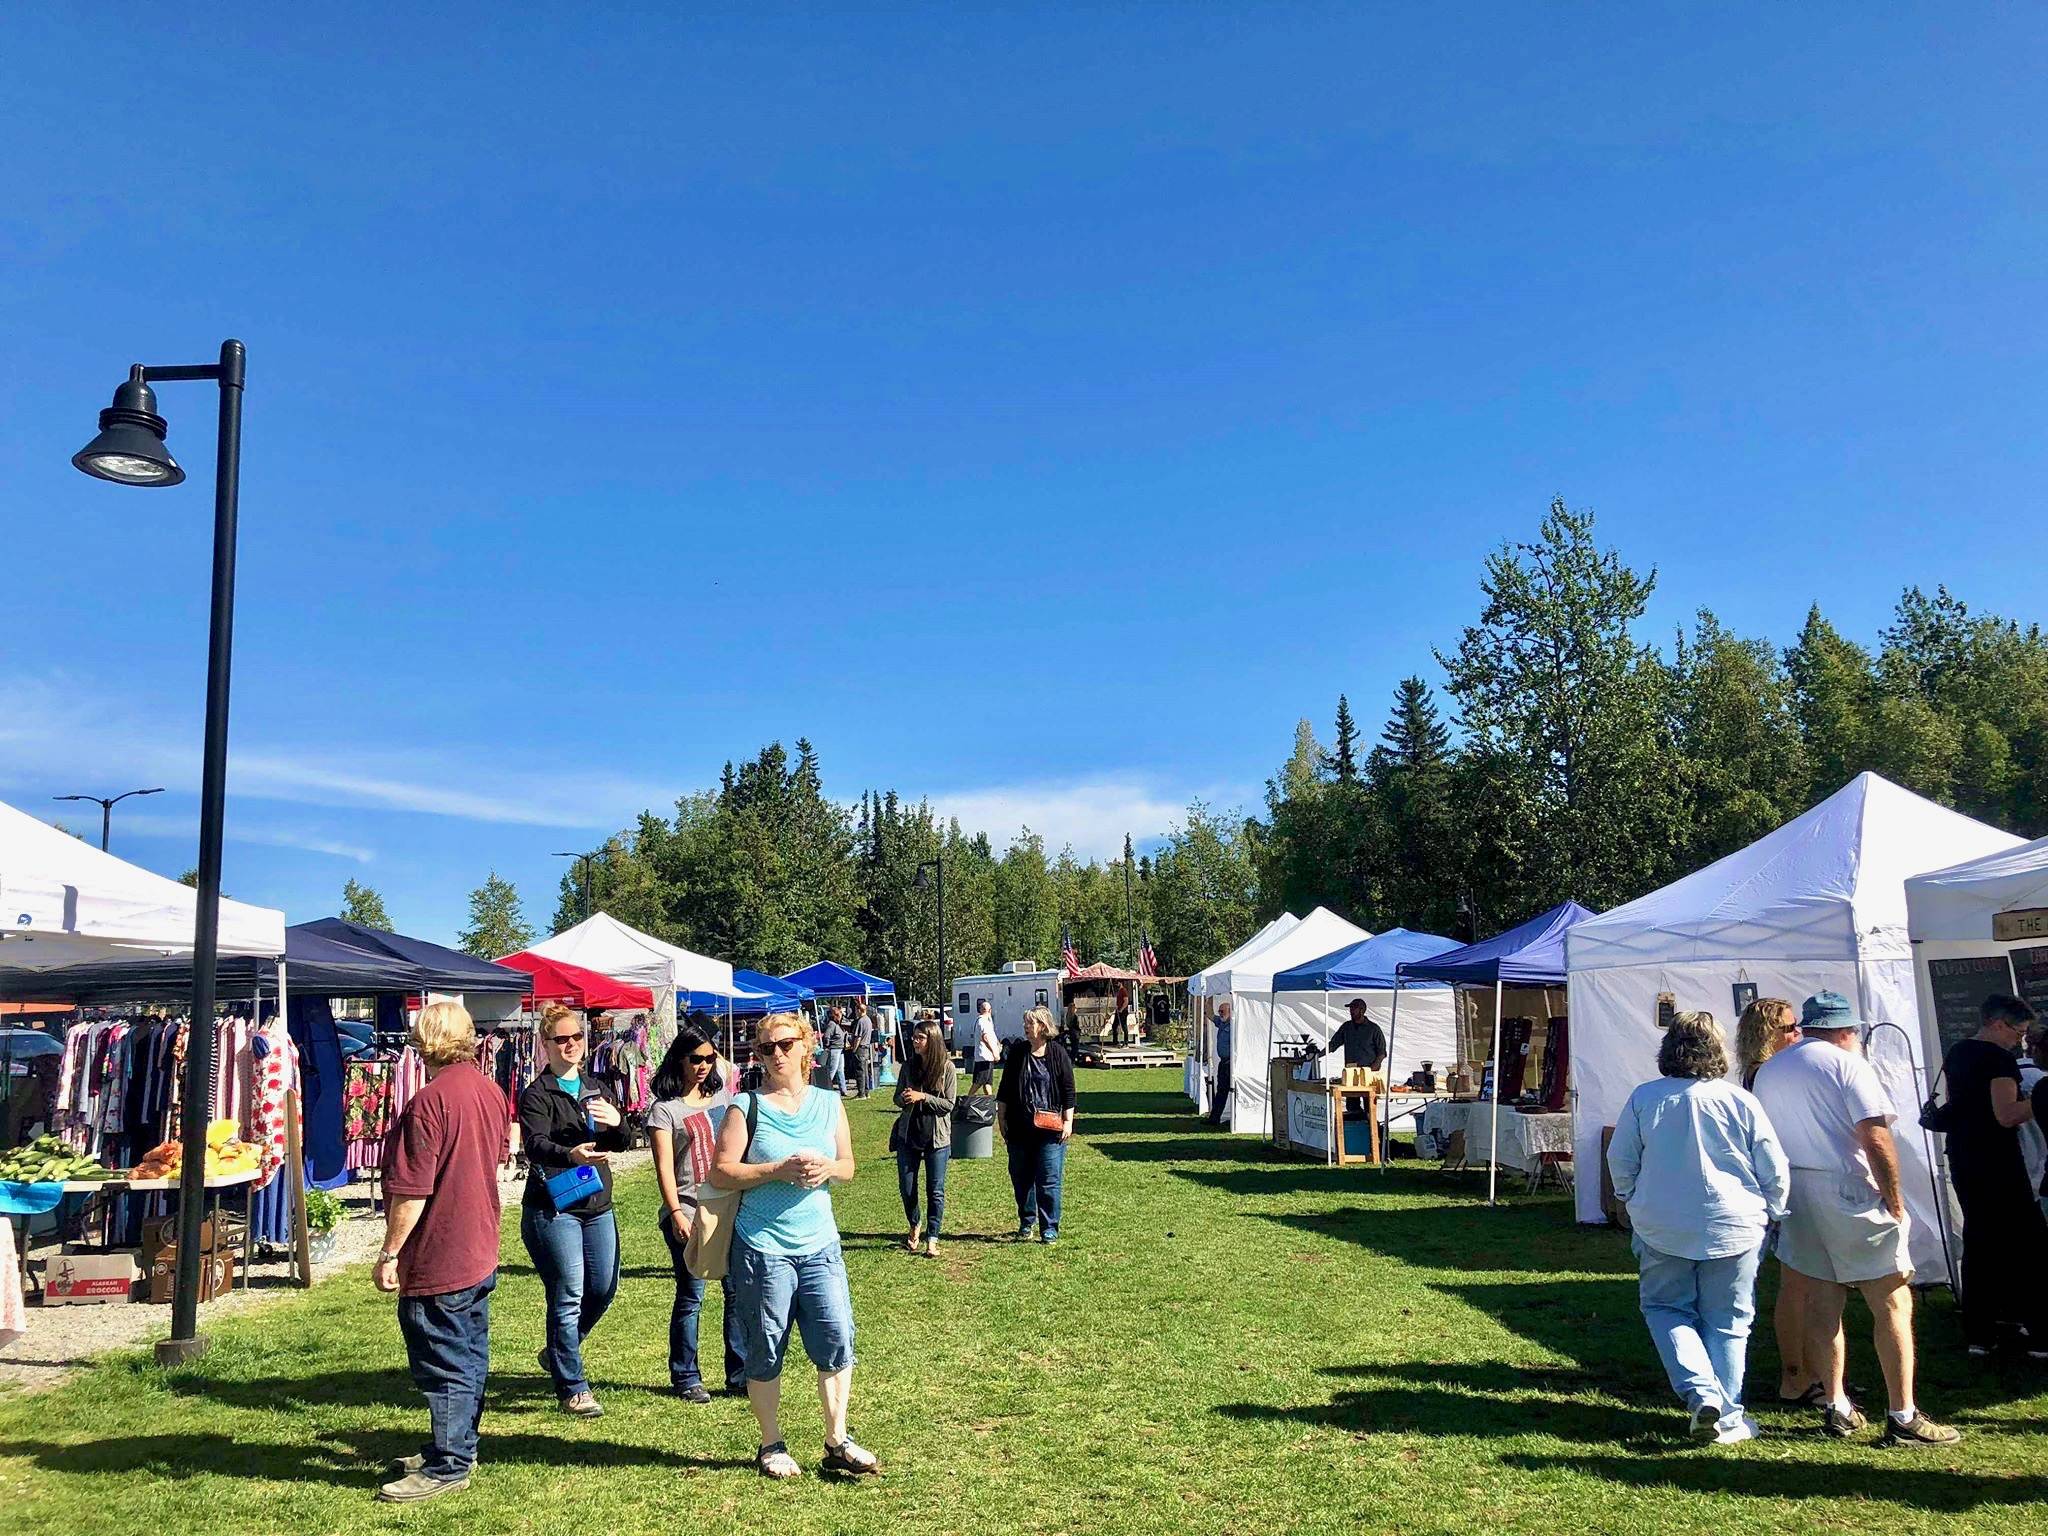 Marketgoers were met with sunshine and clear skies on the last day of the Wednesday Market on Wednesday, Aug. 29, 2018, in Soldotna, Alaska. (Photo by Victoria Petersen/Peninsula Clarion)